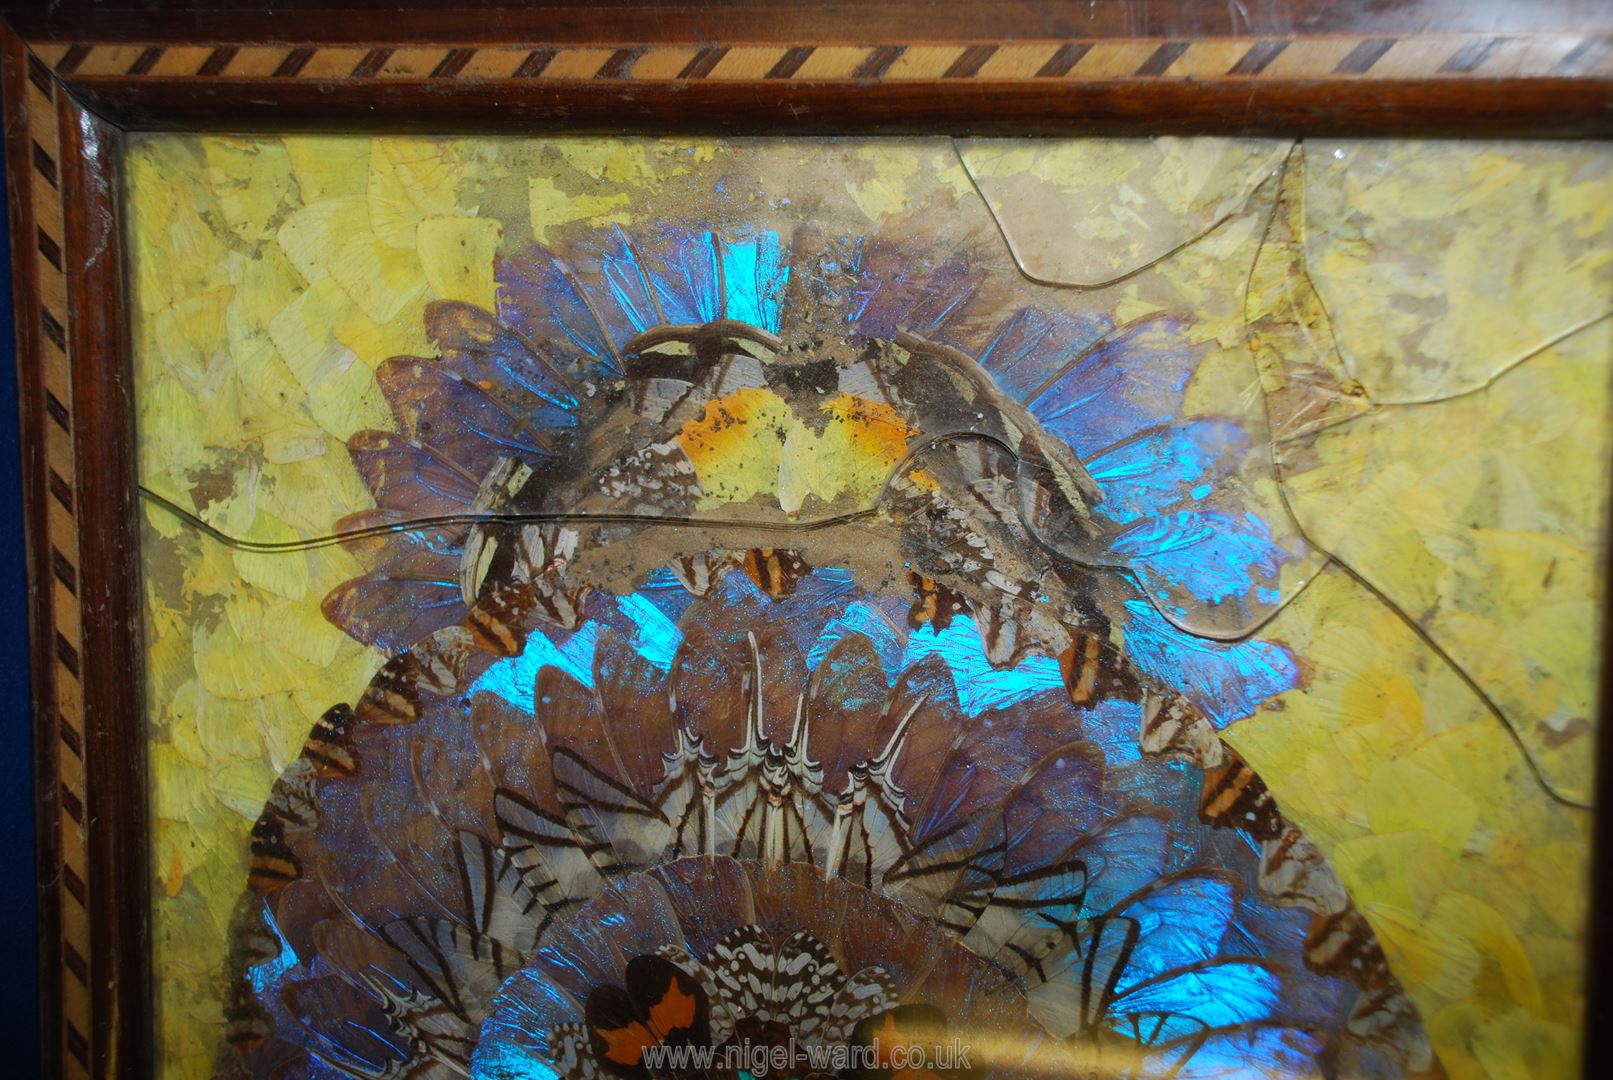 A Brazilian butterfly wing inlay wood serving Tray with iridescent blue wings and yellow wing - Image 2 of 3